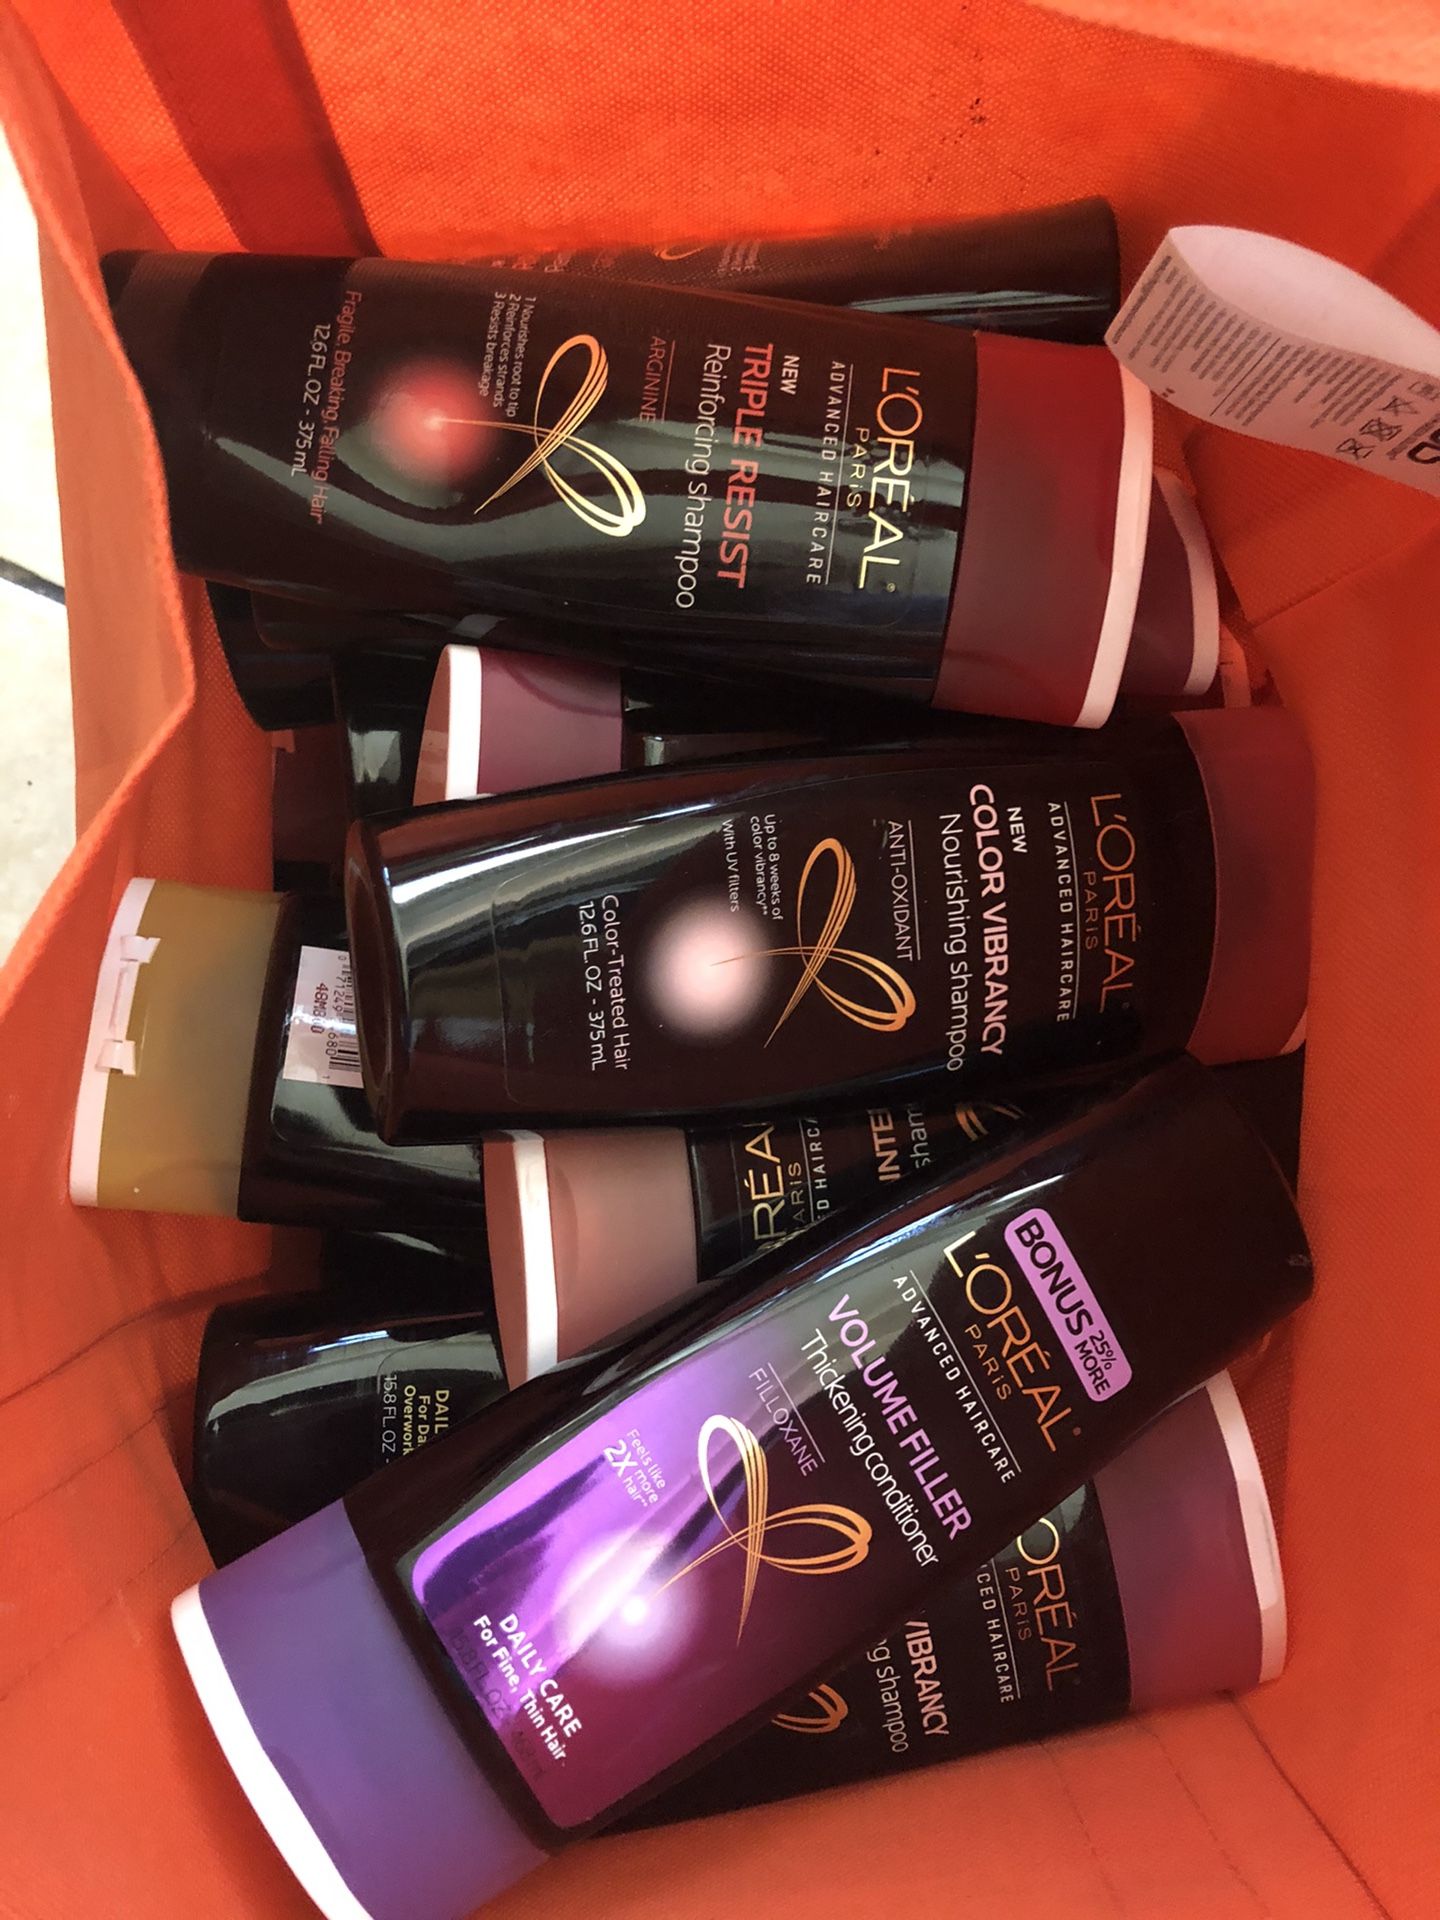 LOREAL SHAMPOO 🧴 & CONDITIONER 🧴 $2.50 EACH OR 2 FOR $5